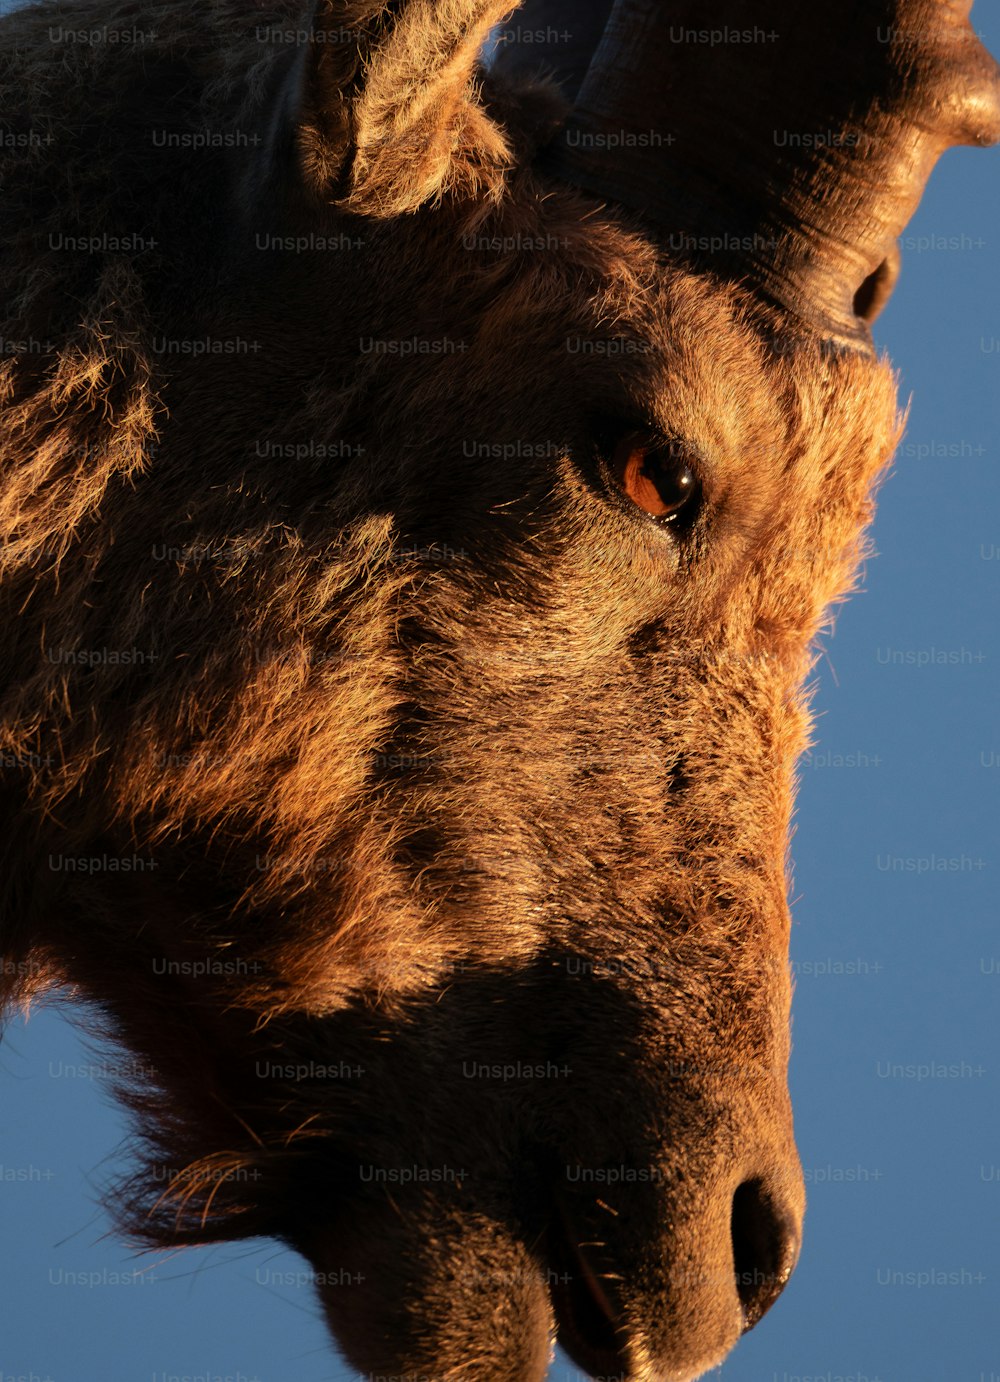 a close up of a horned animal with a sky background